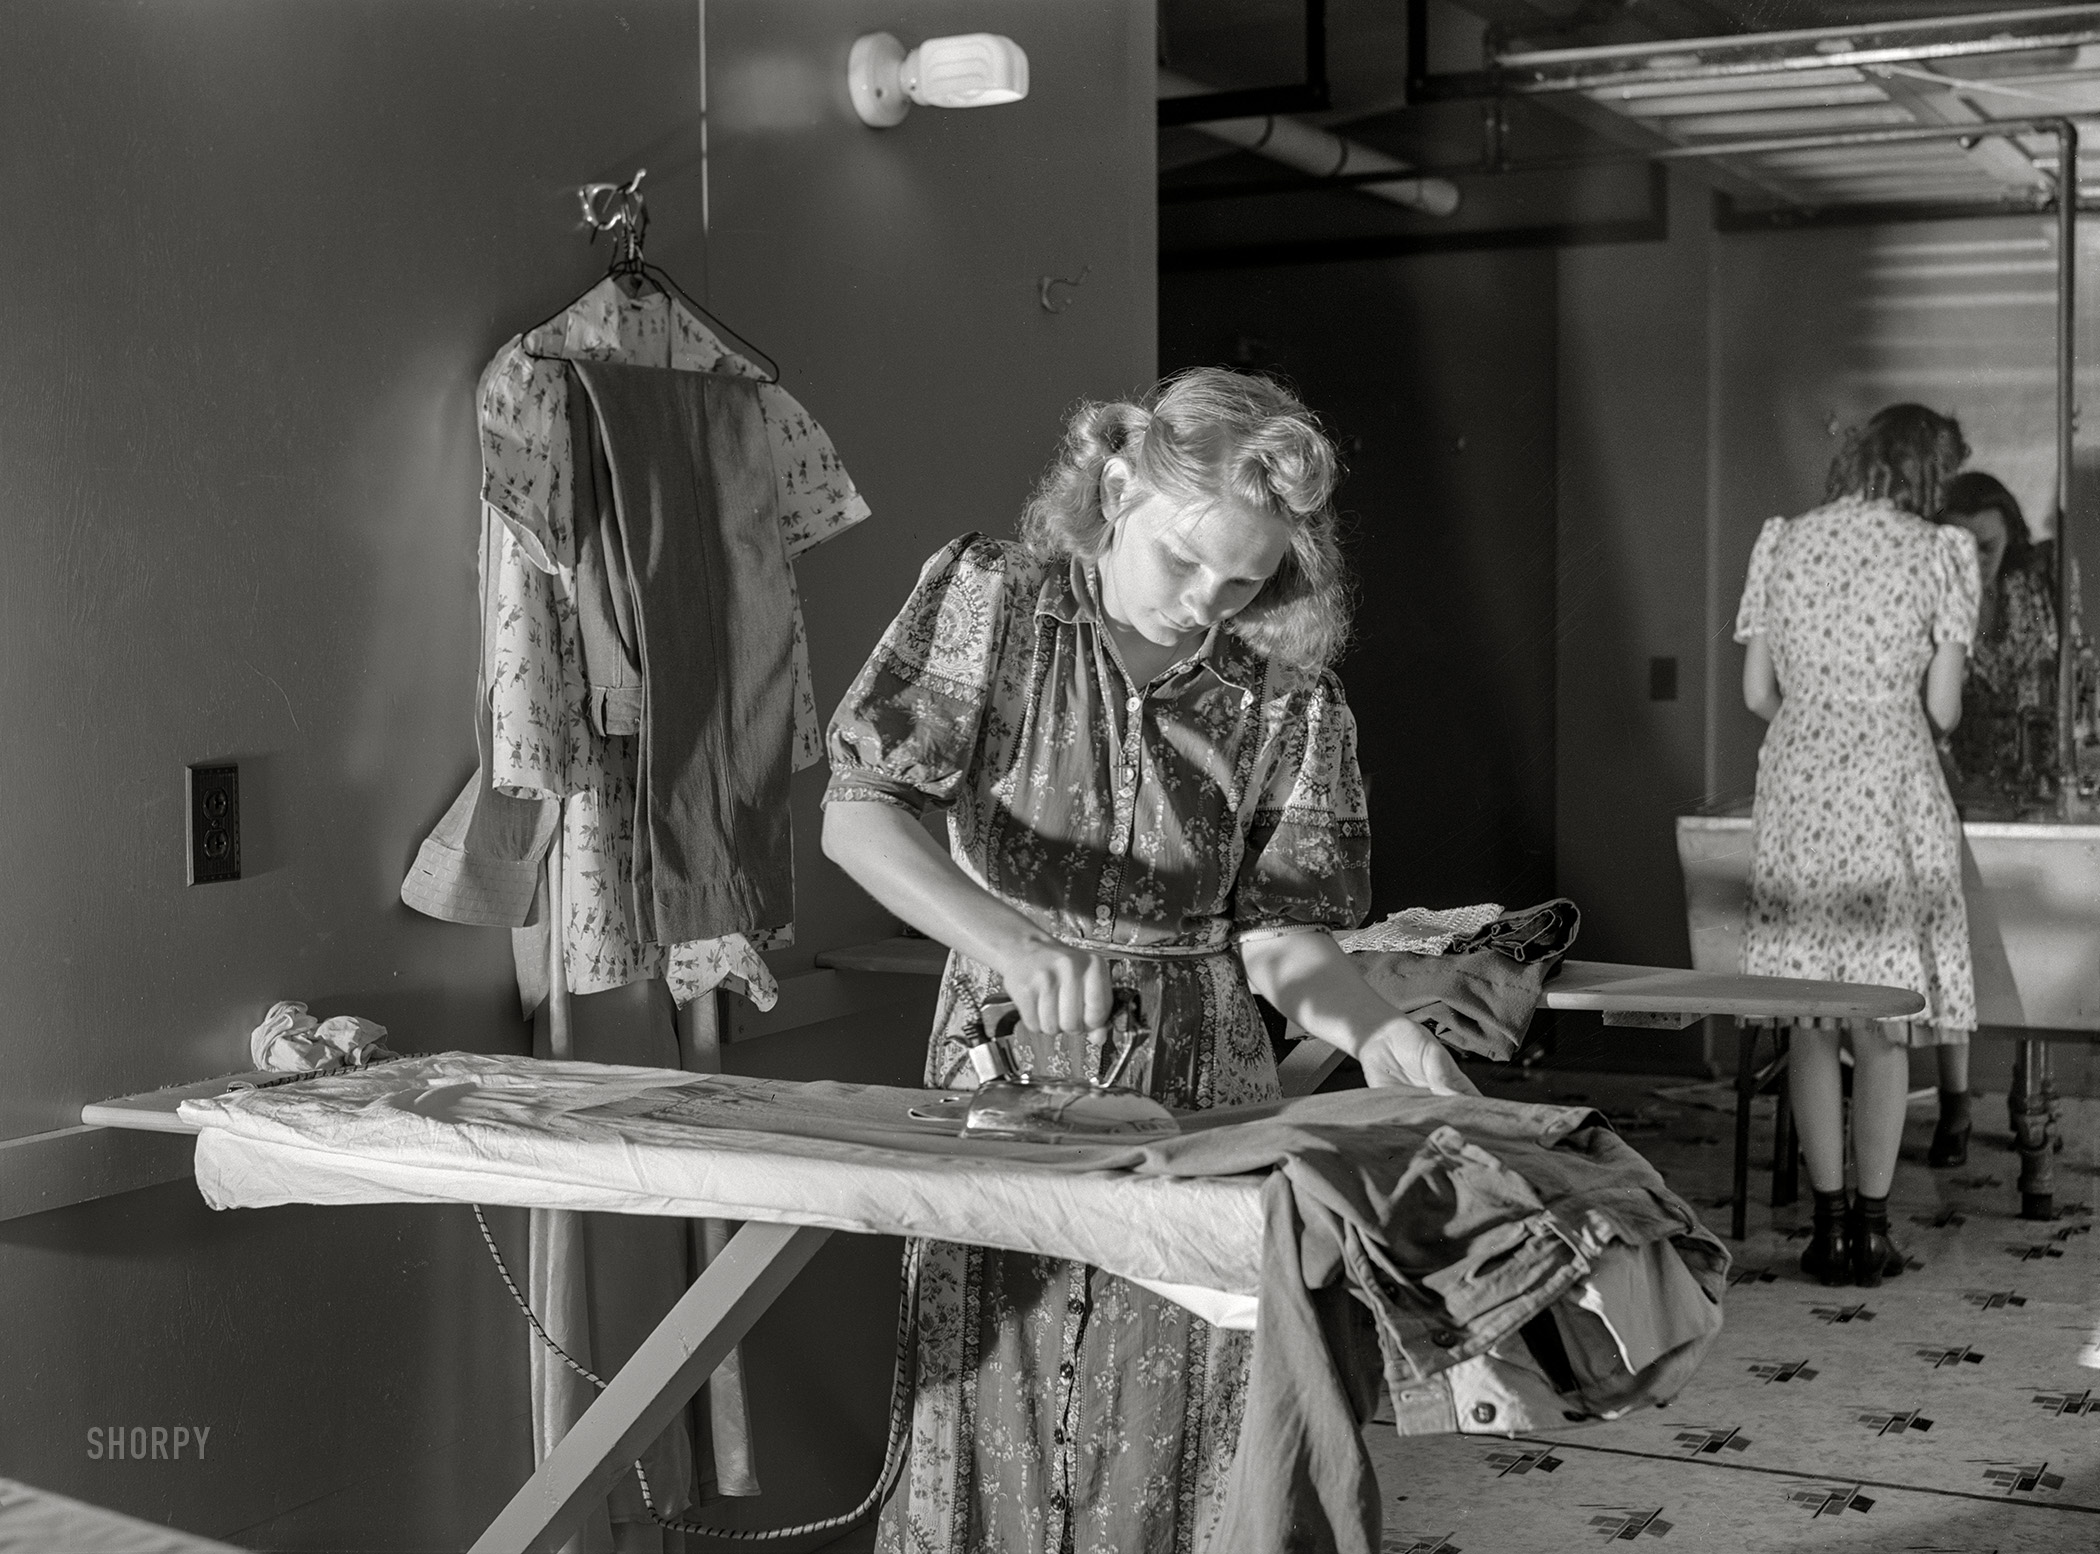 June 1941. "Wife of defense worker ironing clothes in utility building at FSA trailer camp. Erie, Pennsylvania." Photo by John Vachon for the Farm Security Administration. View full size.